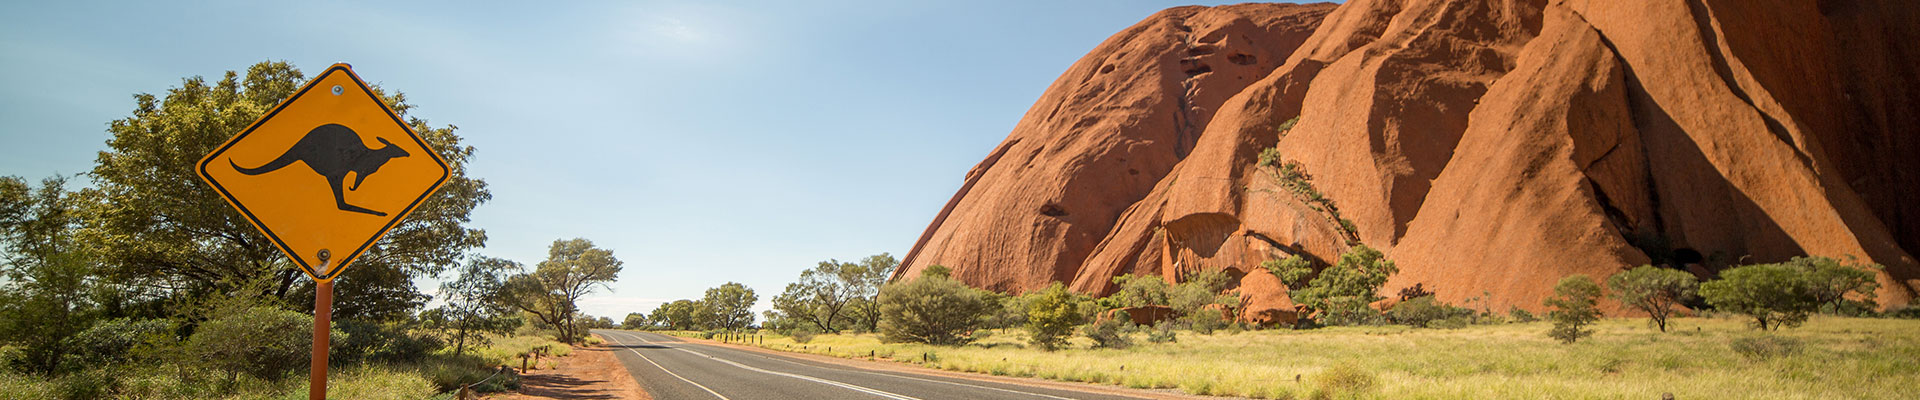 Fantasy RV Tours: 7 Day Real Outback Add-on (07OROP-031325)